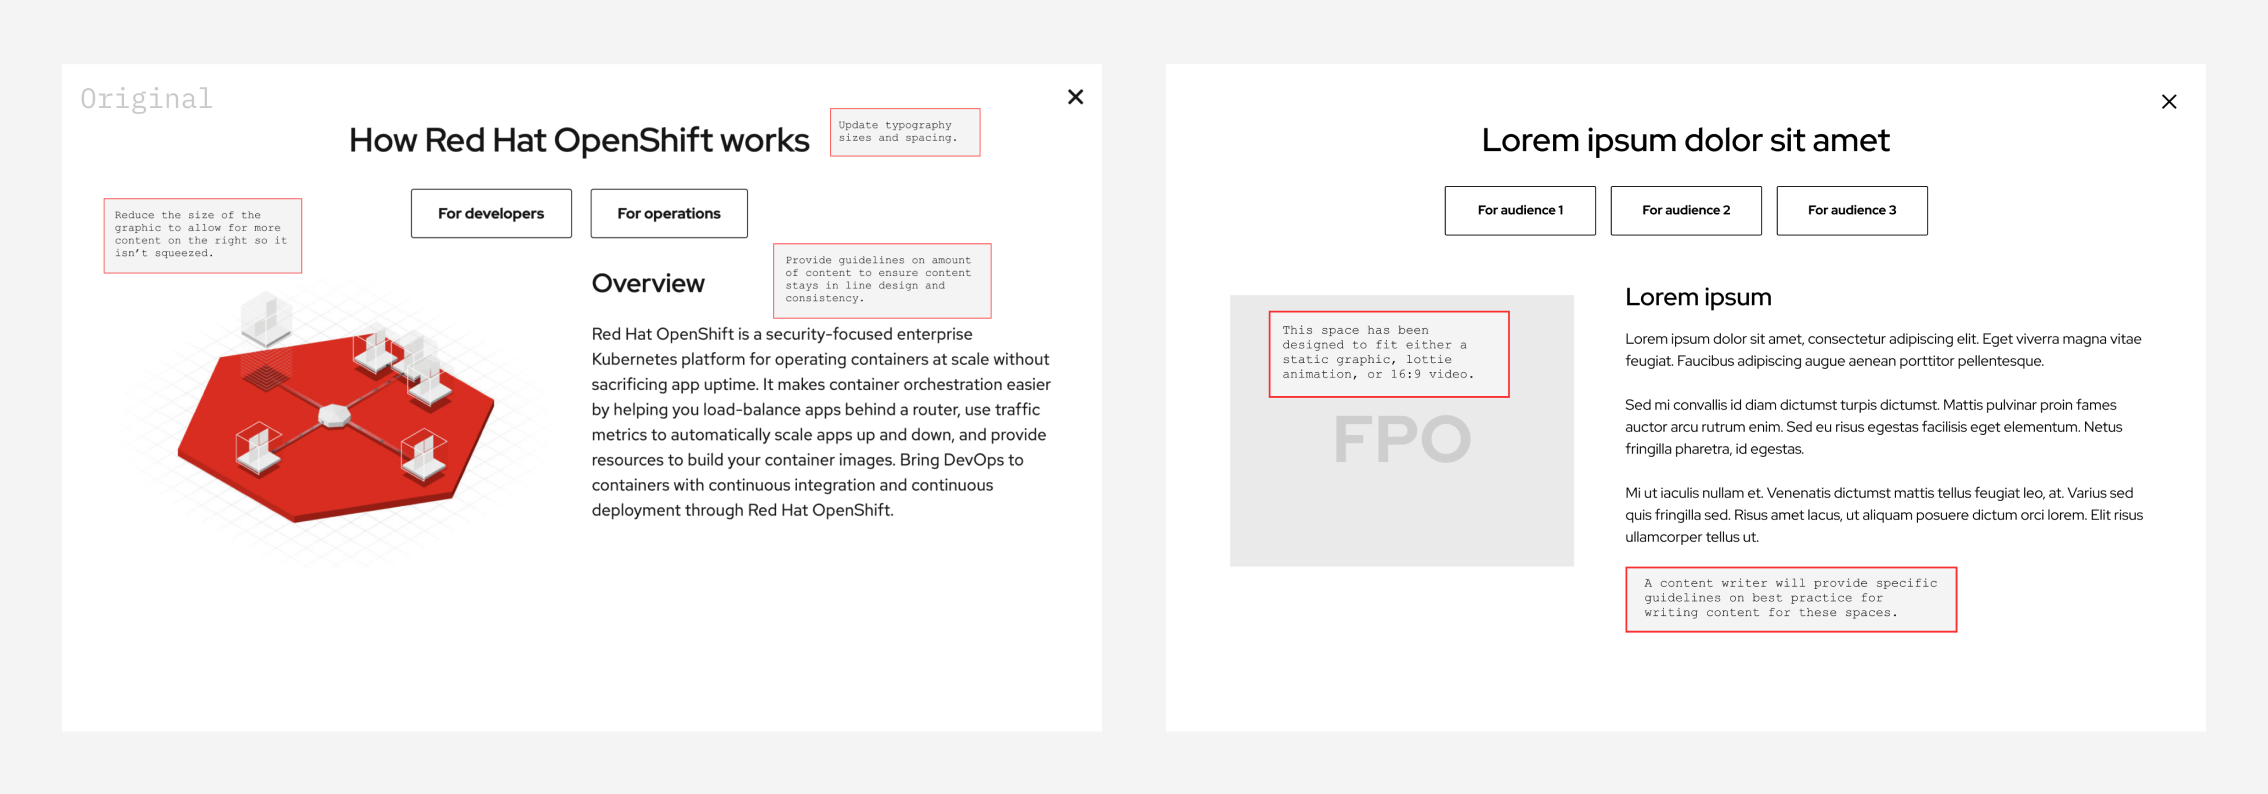 comparison of original modal and proposed wireframe